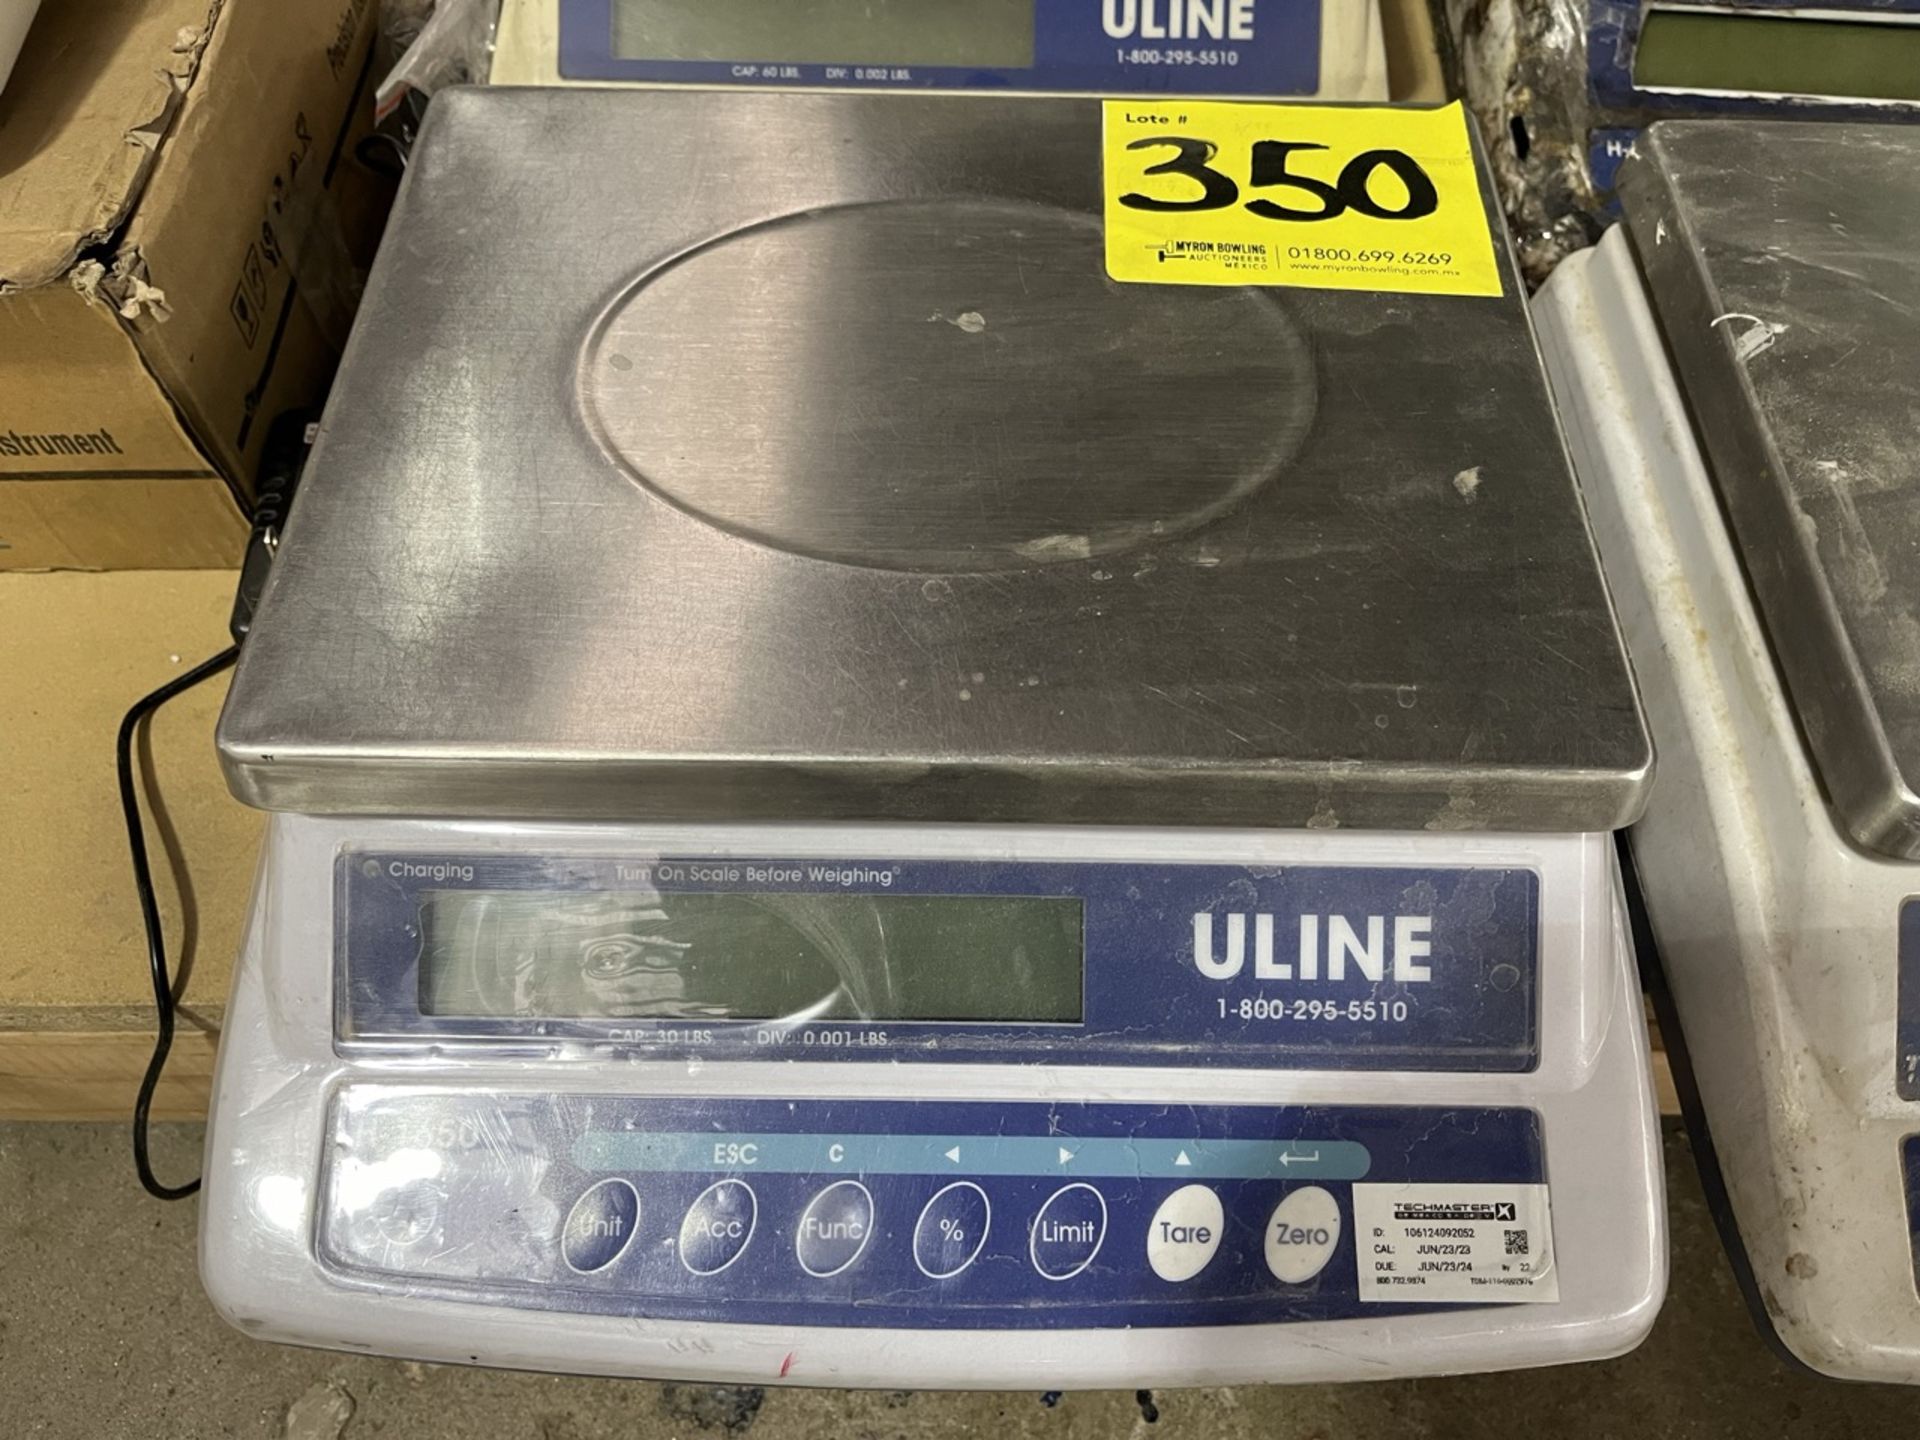 Lot of 4 pieces contains: 3 Uline Precision Electronic Scales, model H-1651; 1 Uline Precision Elec - Image 7 of 11